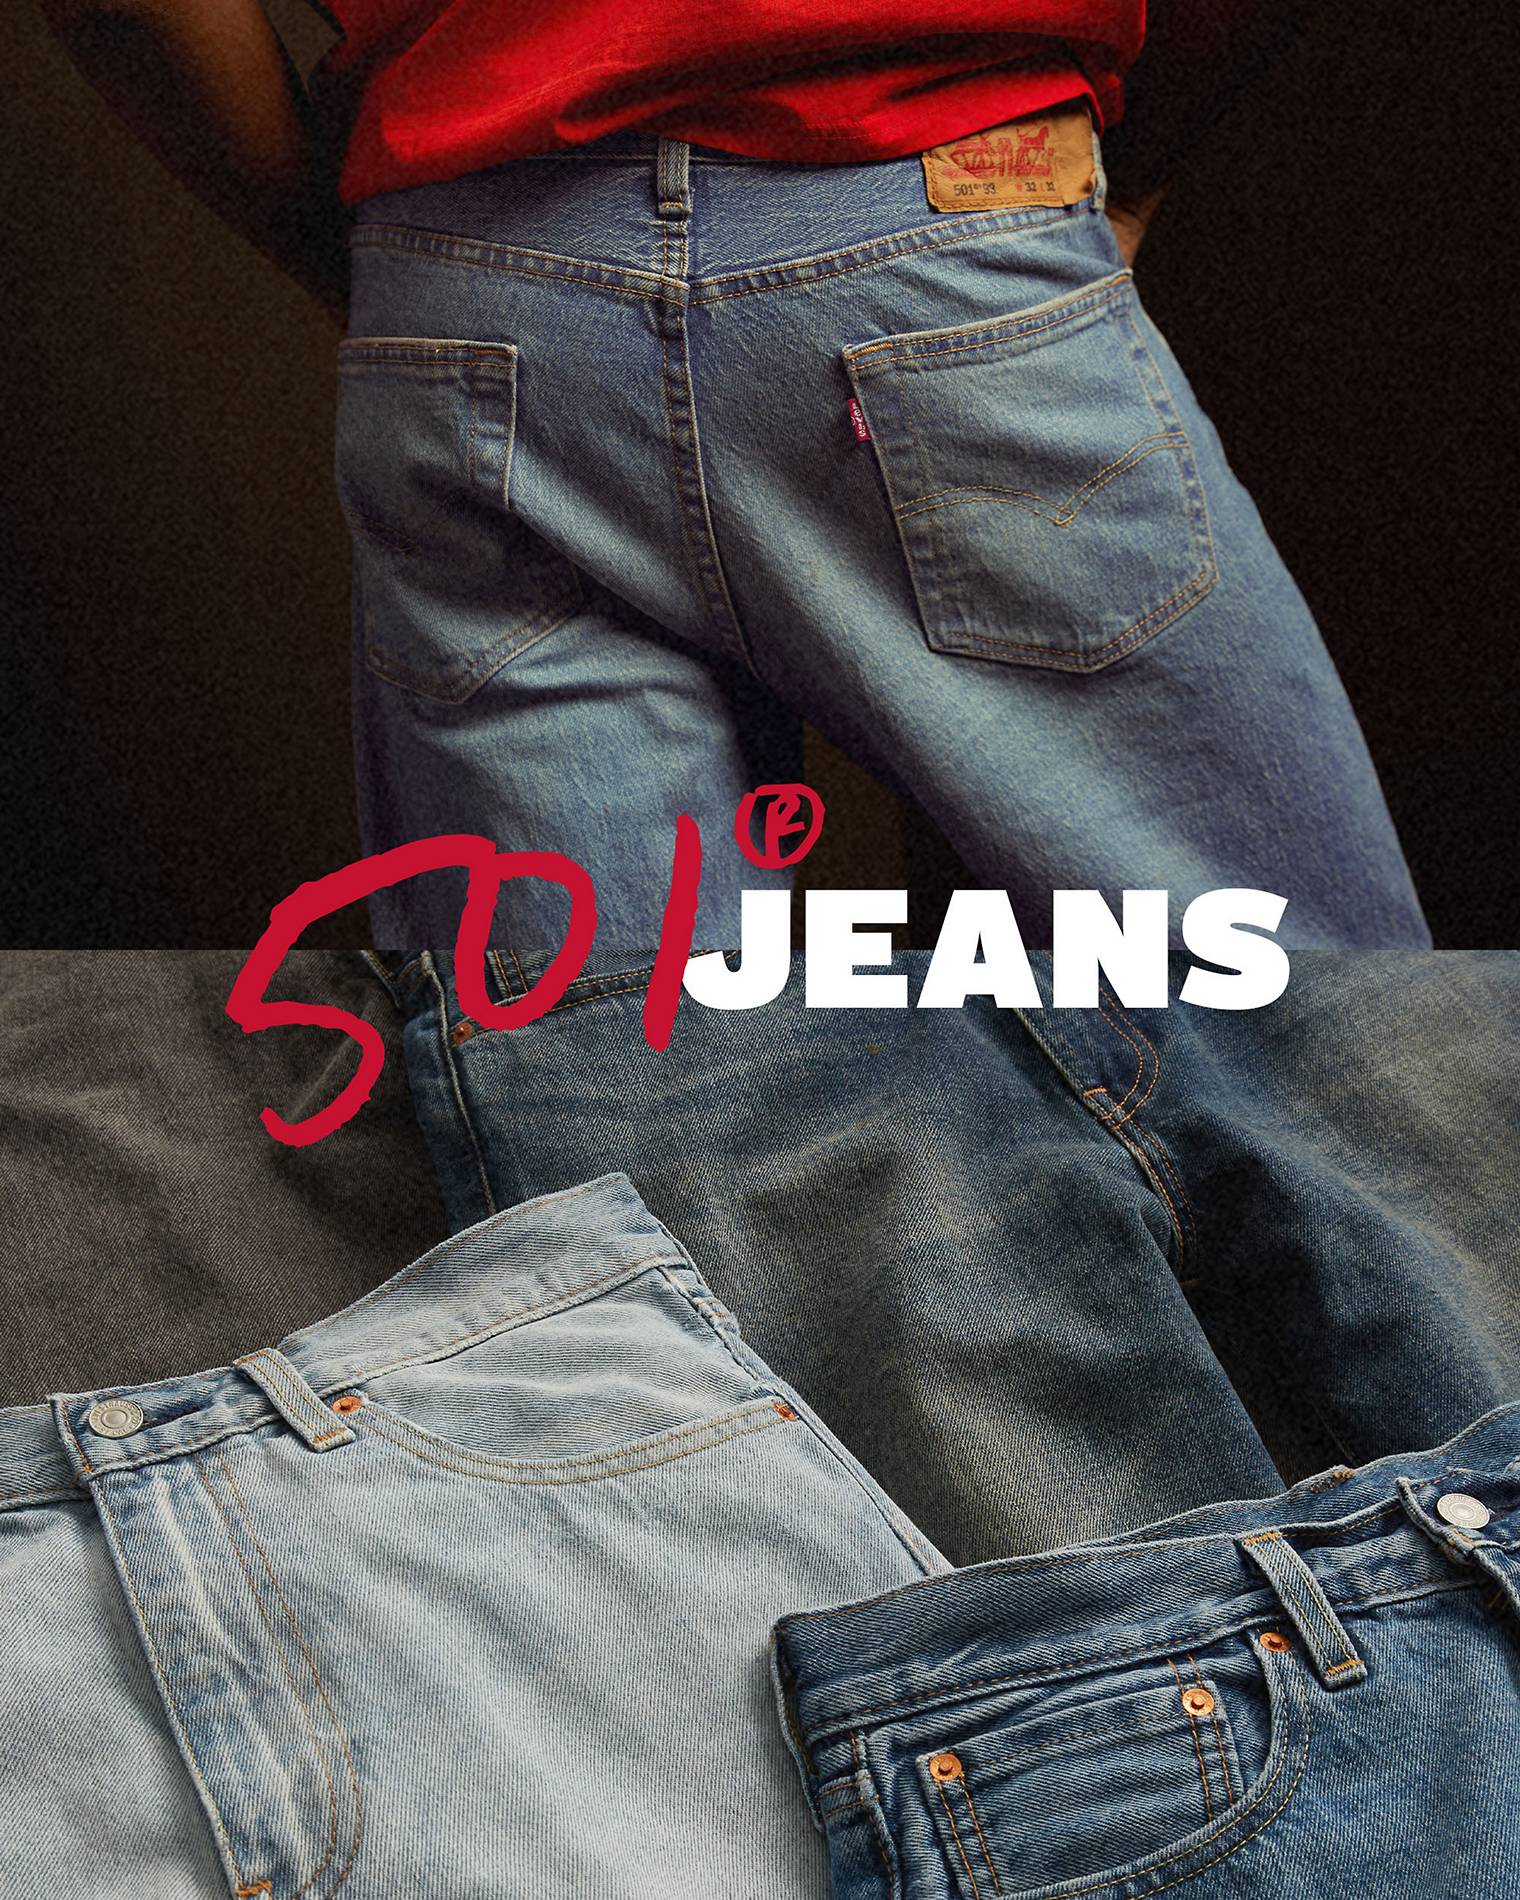 Split screen of men's 501® buttshot and multi jean flat lay with overlaid "501® Jeans" graphic lockup